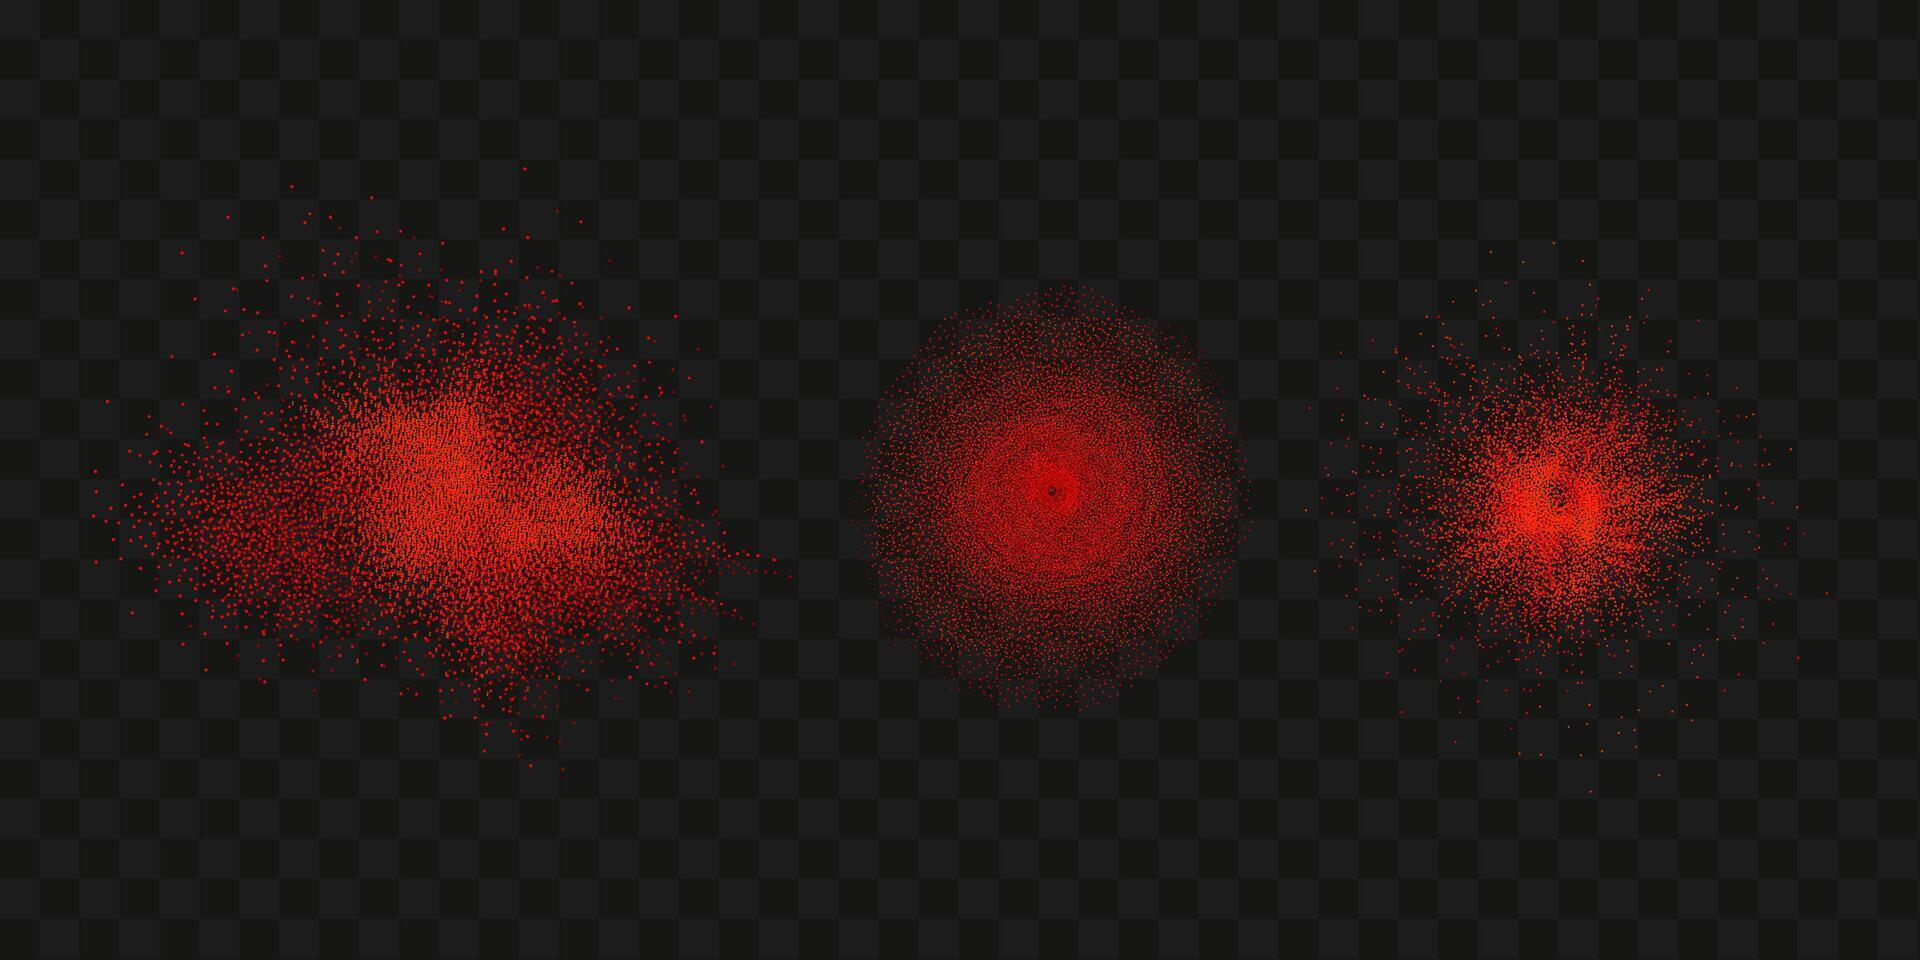 Grainy scatterings of  spicy burst . Splashes of  red pepper powder.Overlay effect chilli or paprika spice splatters. Vector realistic illustration of hot dried spice.